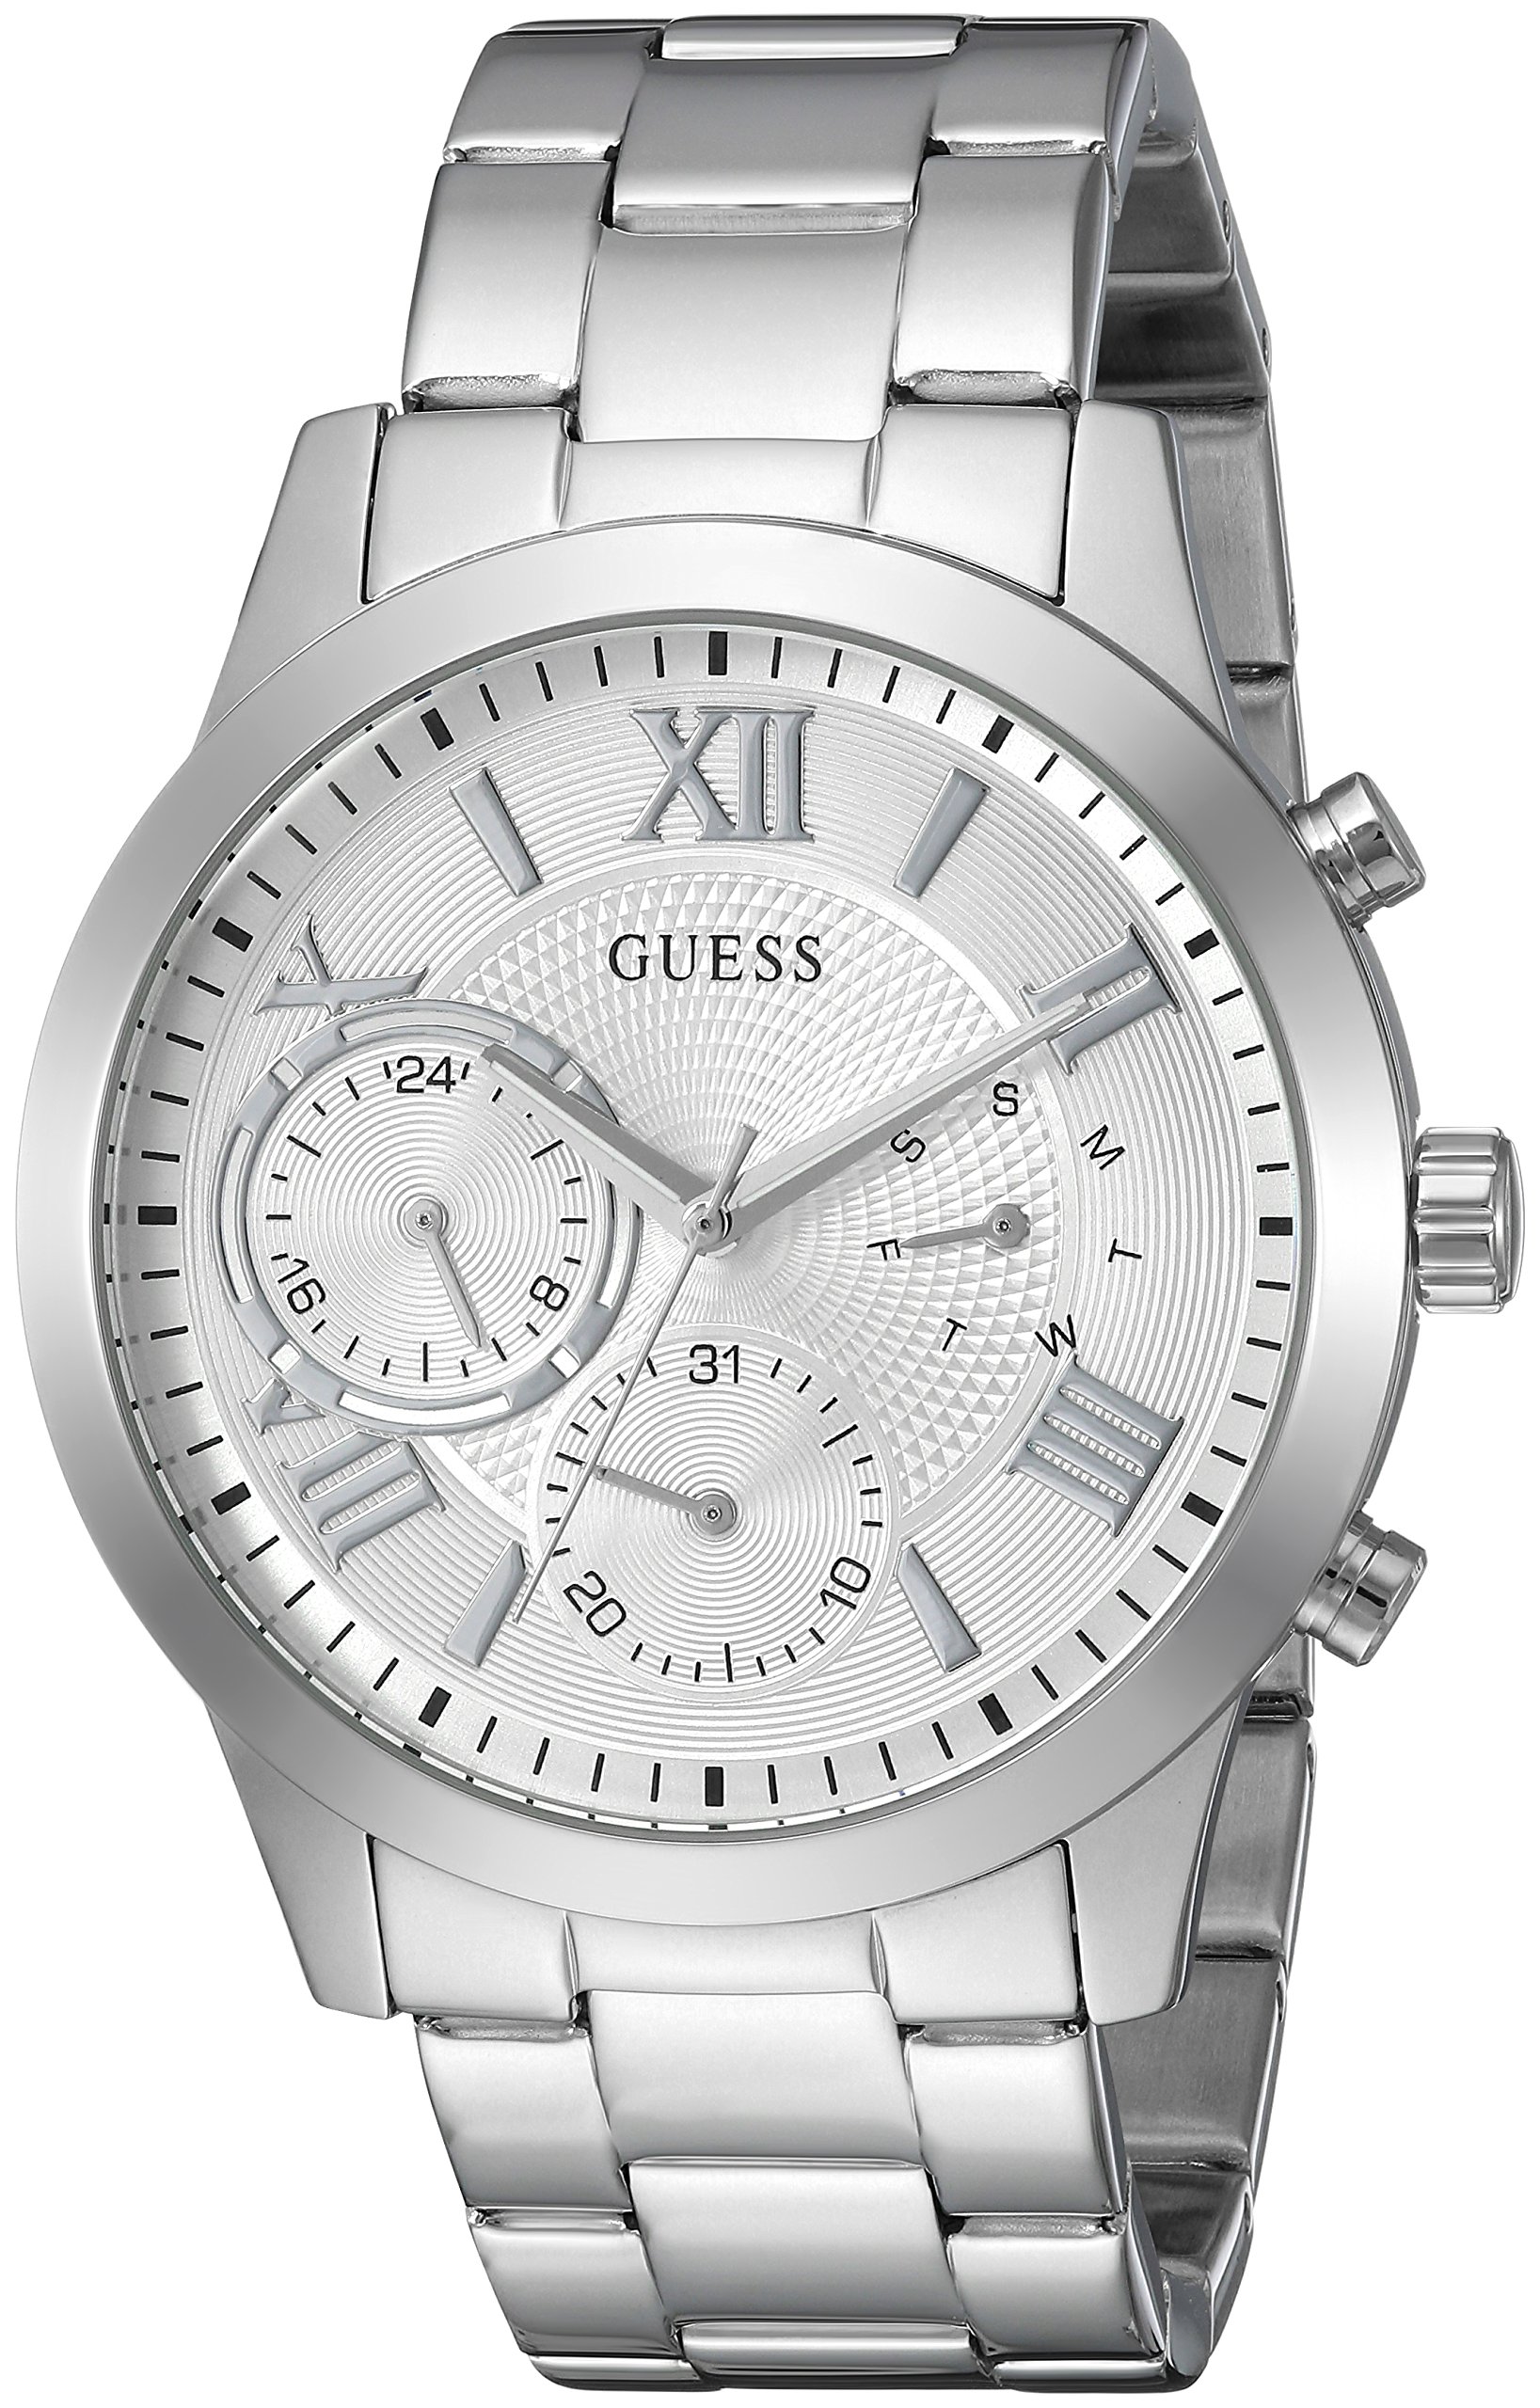 GUESS Connected Digital 47mm Watch